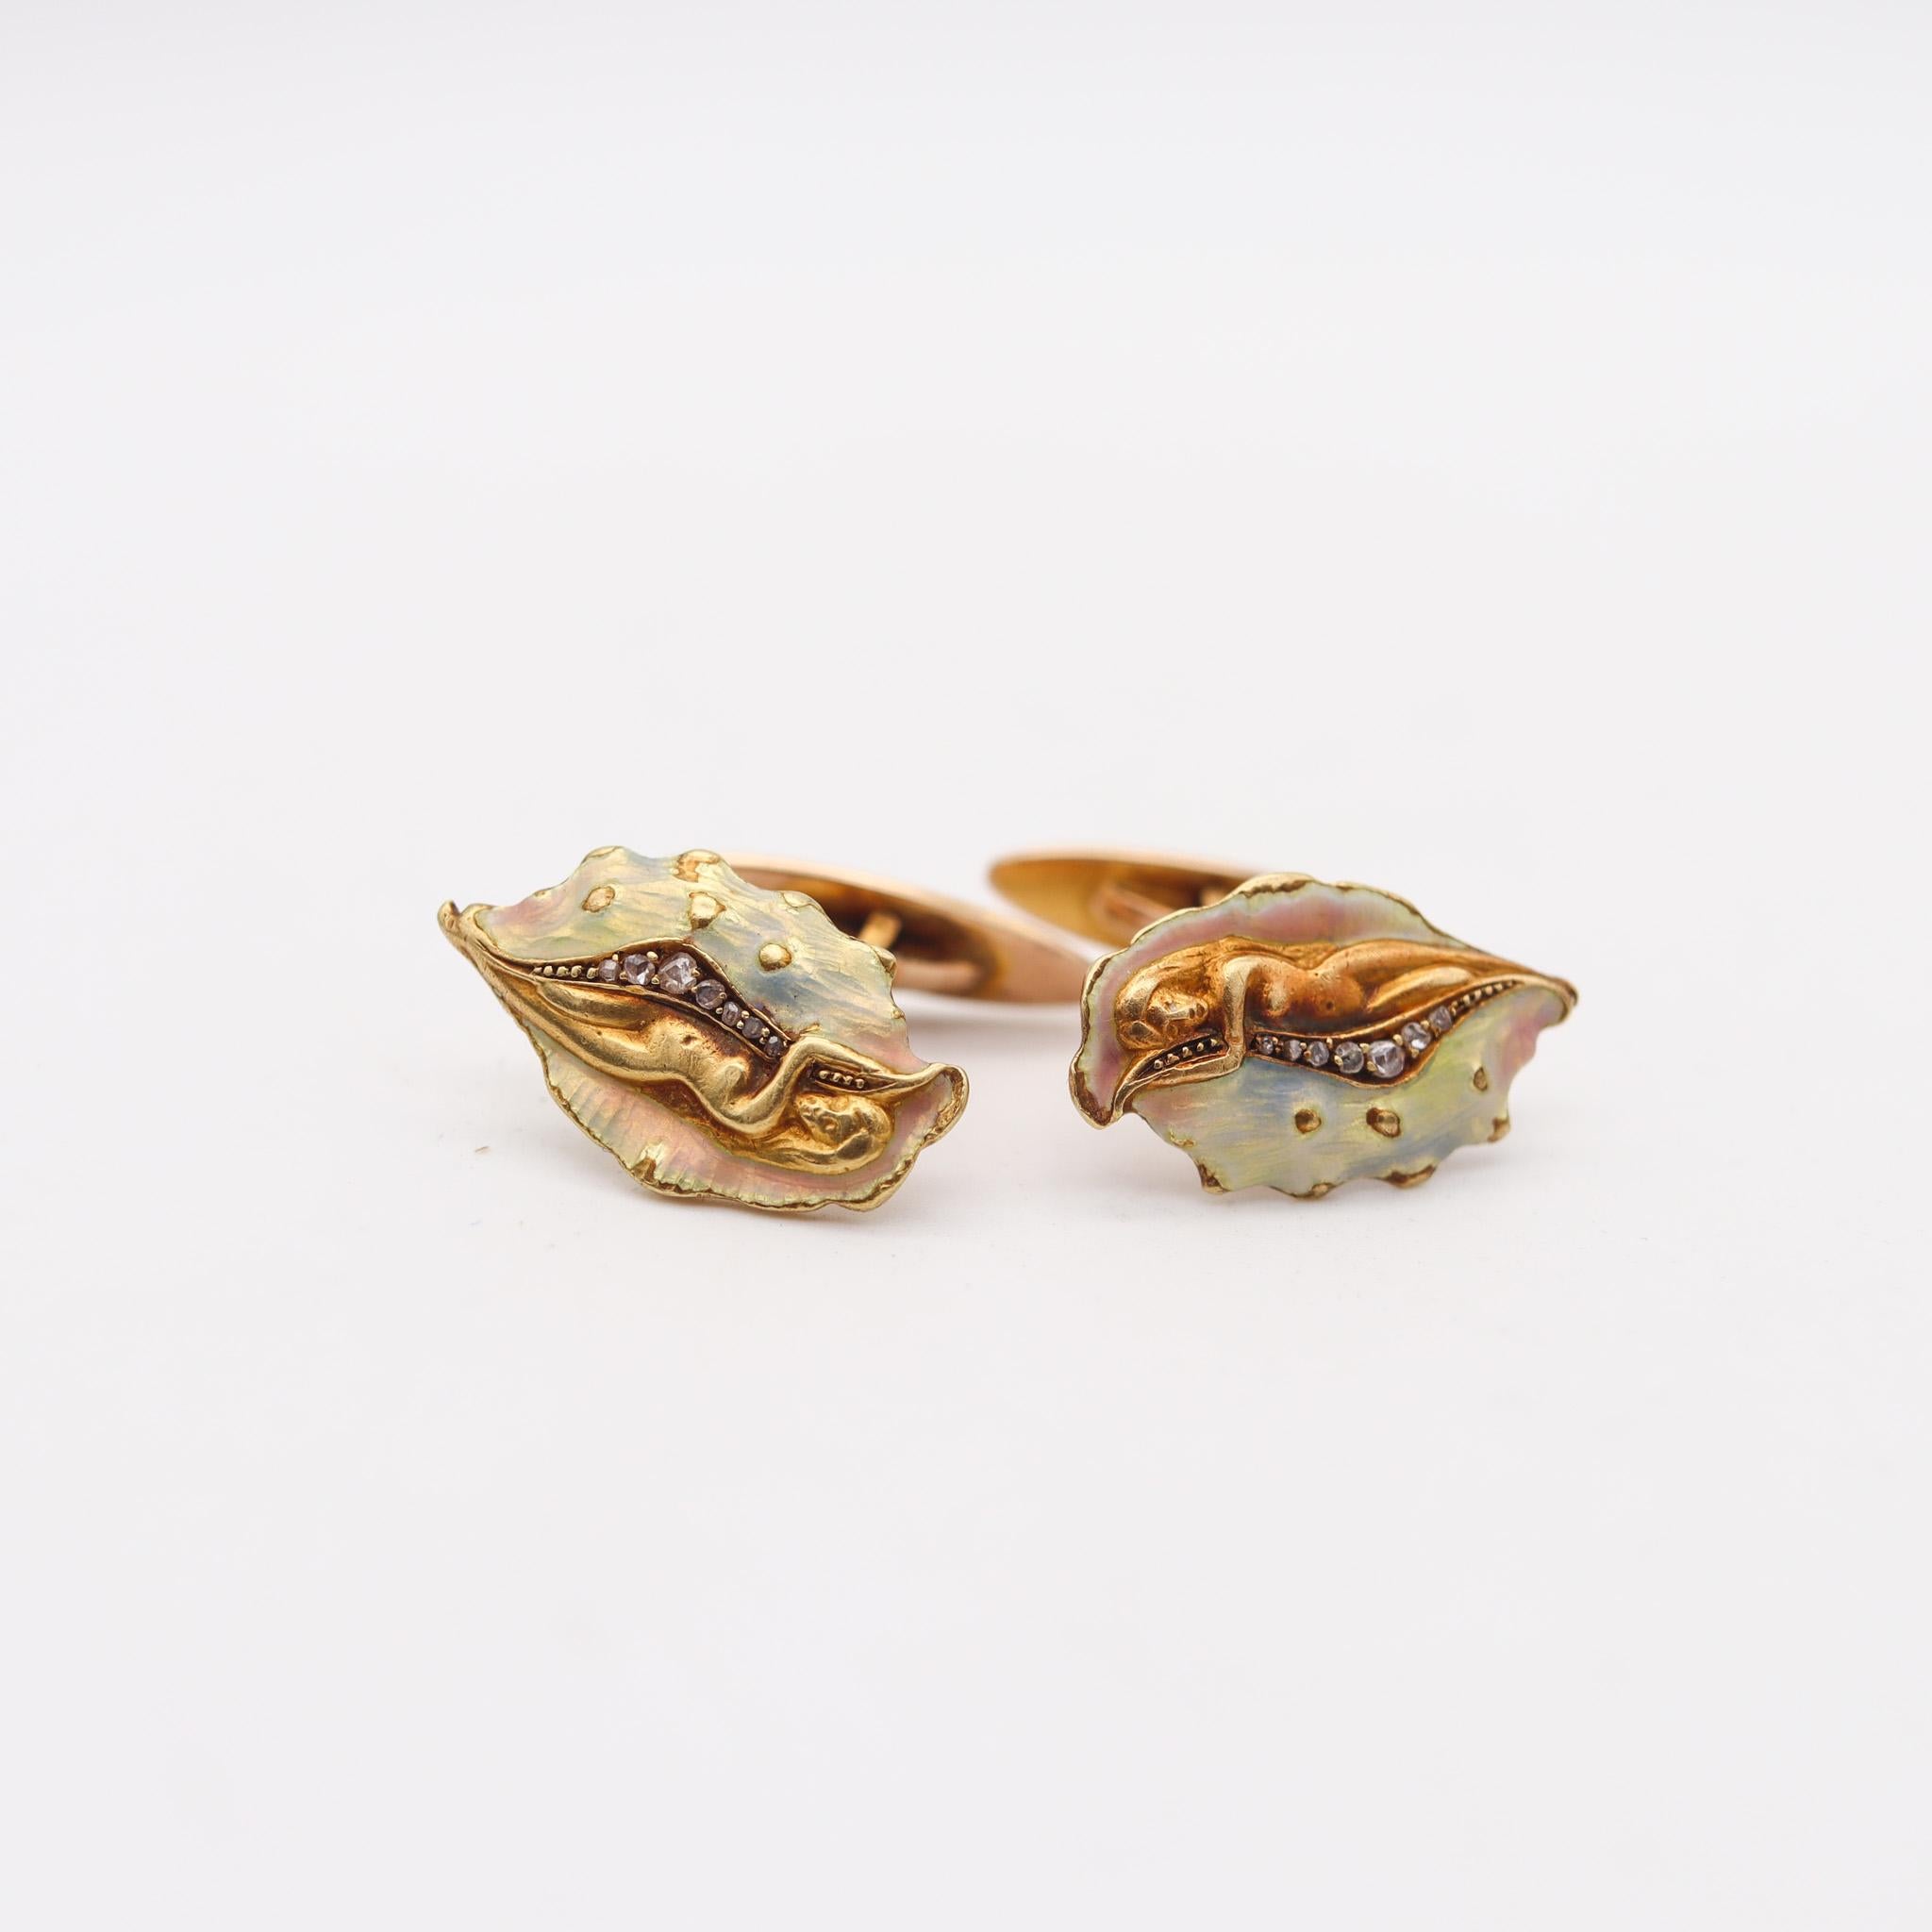 Rose Cut Germany 1900 Art Nouveau Enameled Cufflinks In 18Kt Gold With Diamonds With Box For Sale